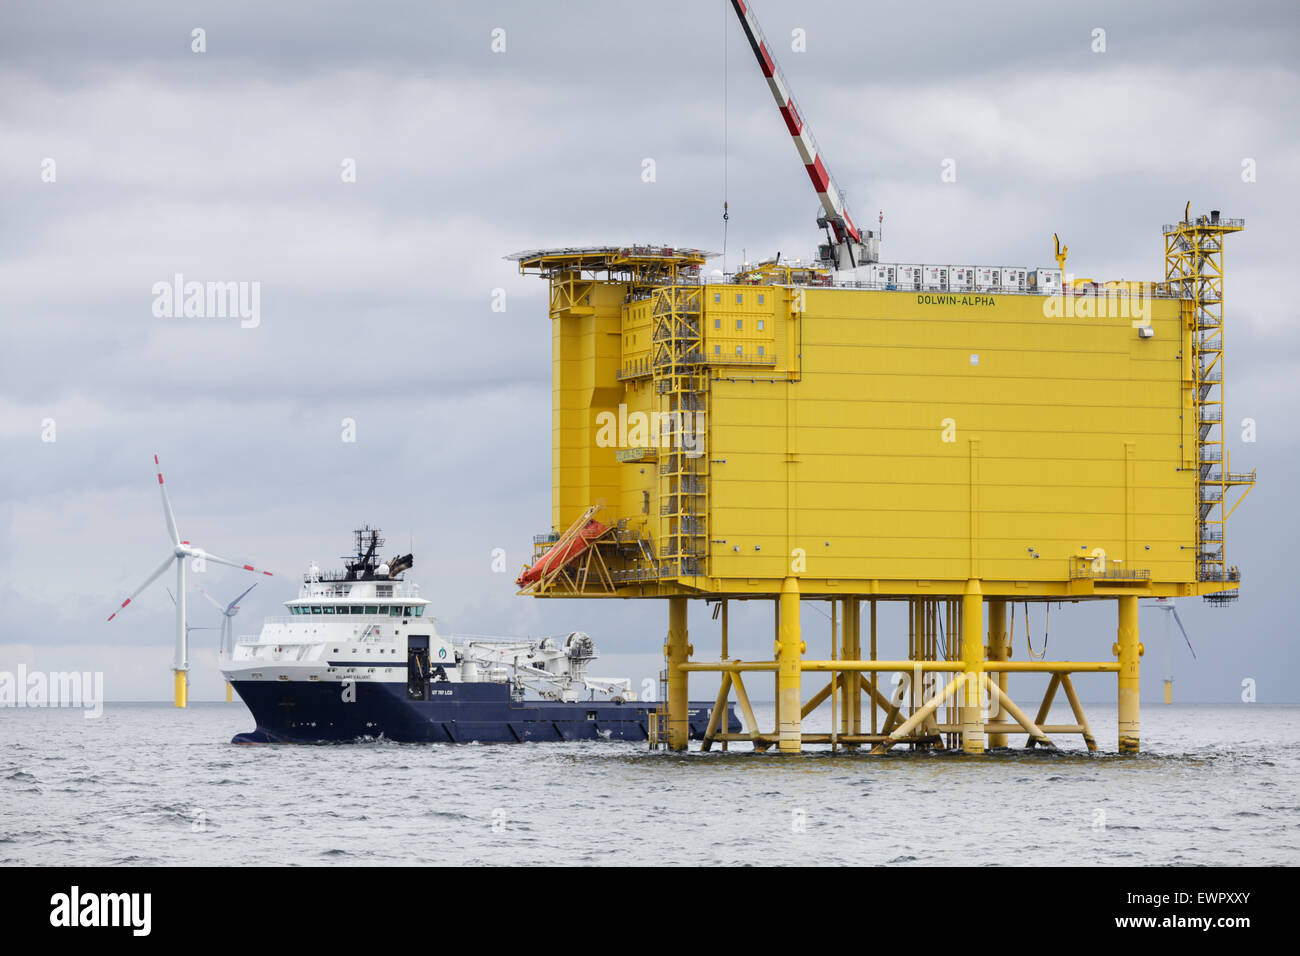 Topside of offshore HVDC converter platform, DolWin Alpha, in the German Bight of the North Sea. Stock Photo